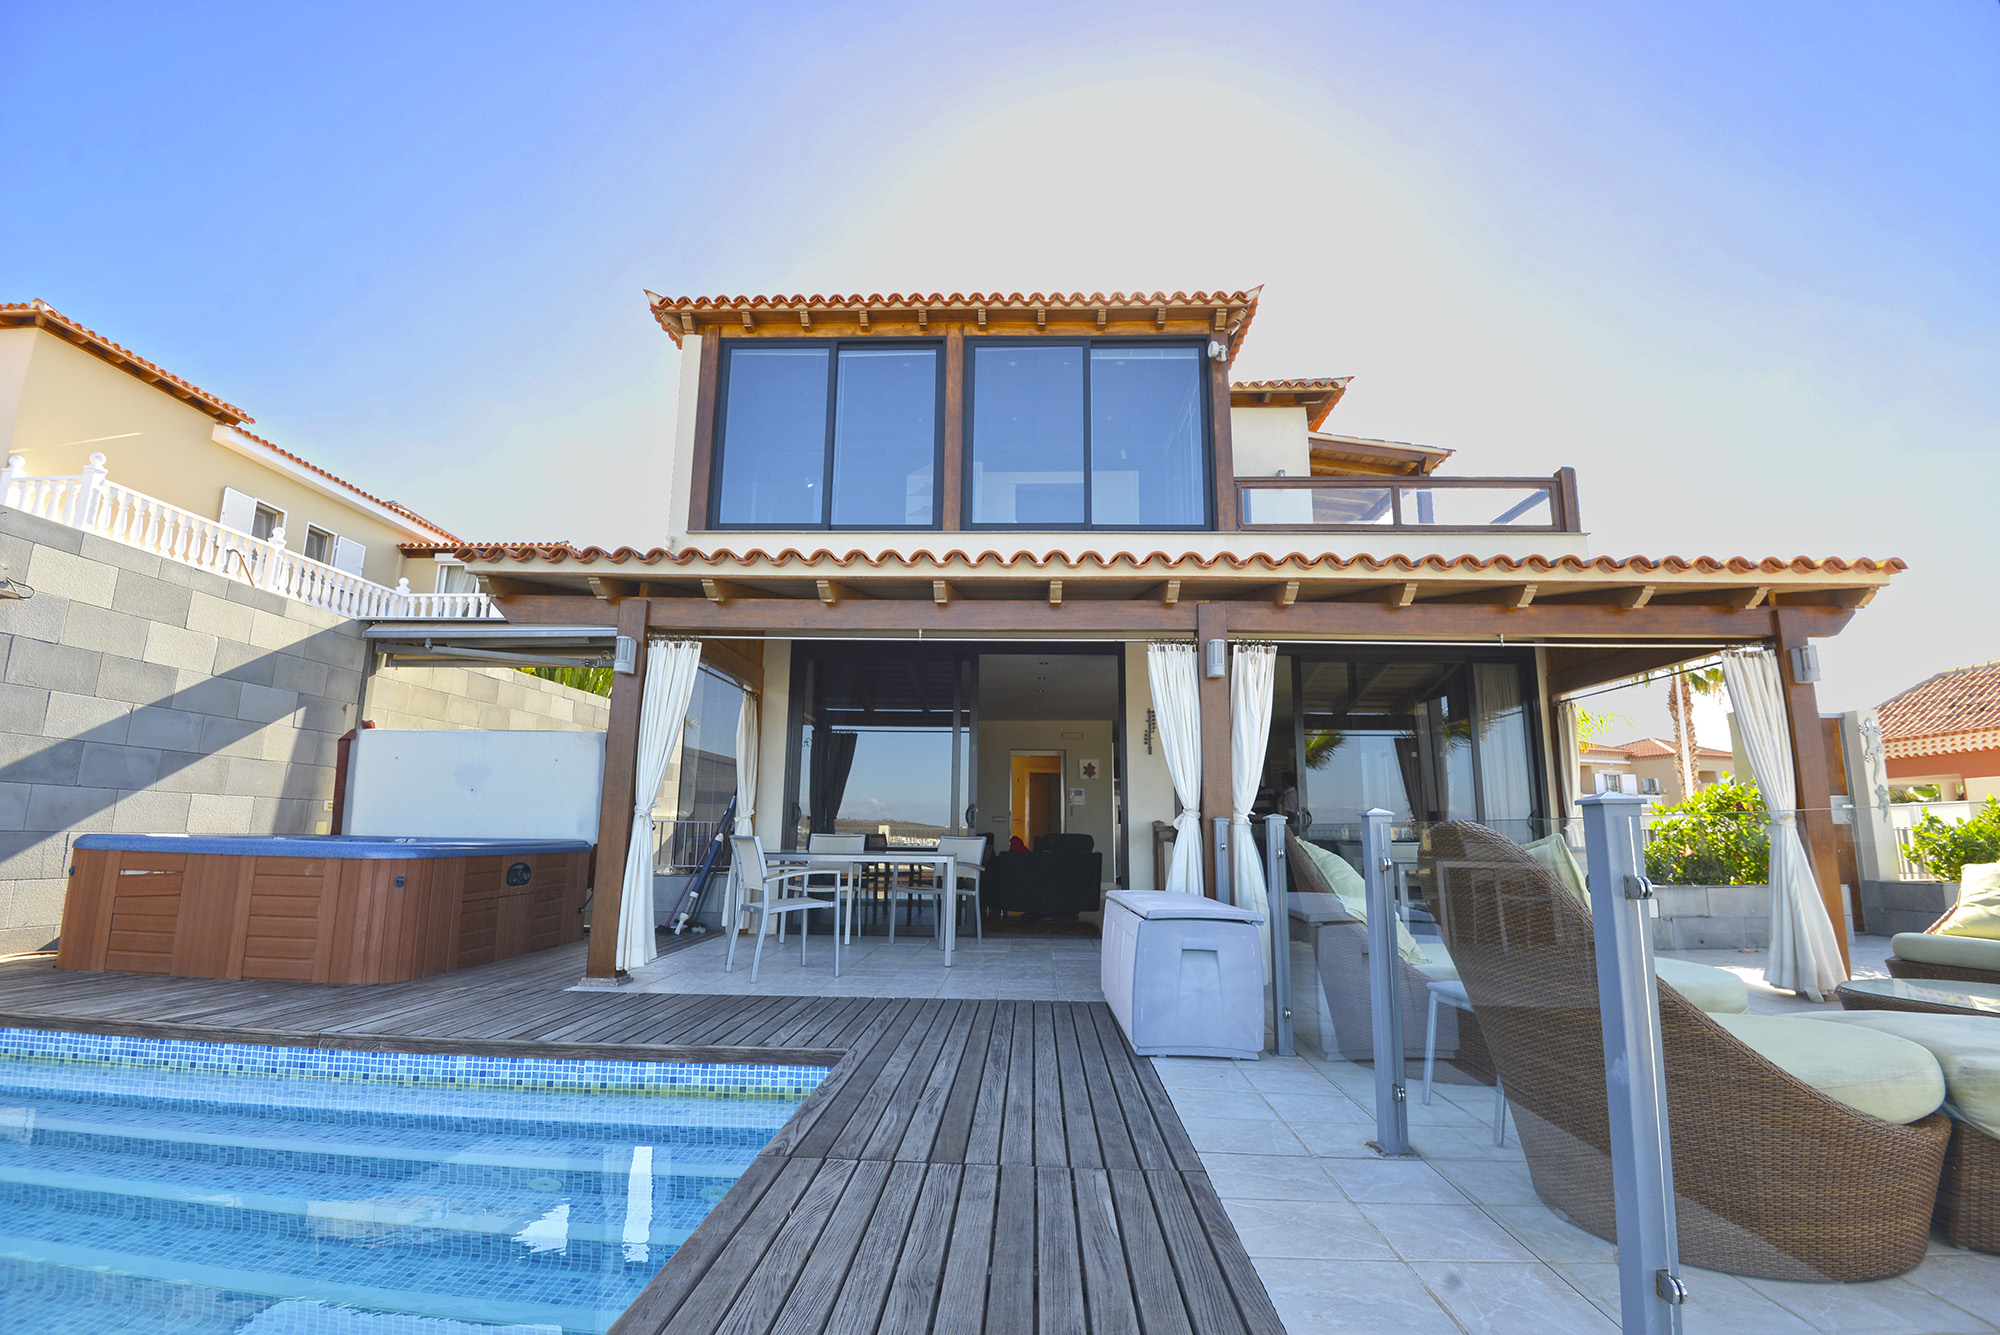 del Bugt Distribuere Terrific holiday homes for sale in Tenerife